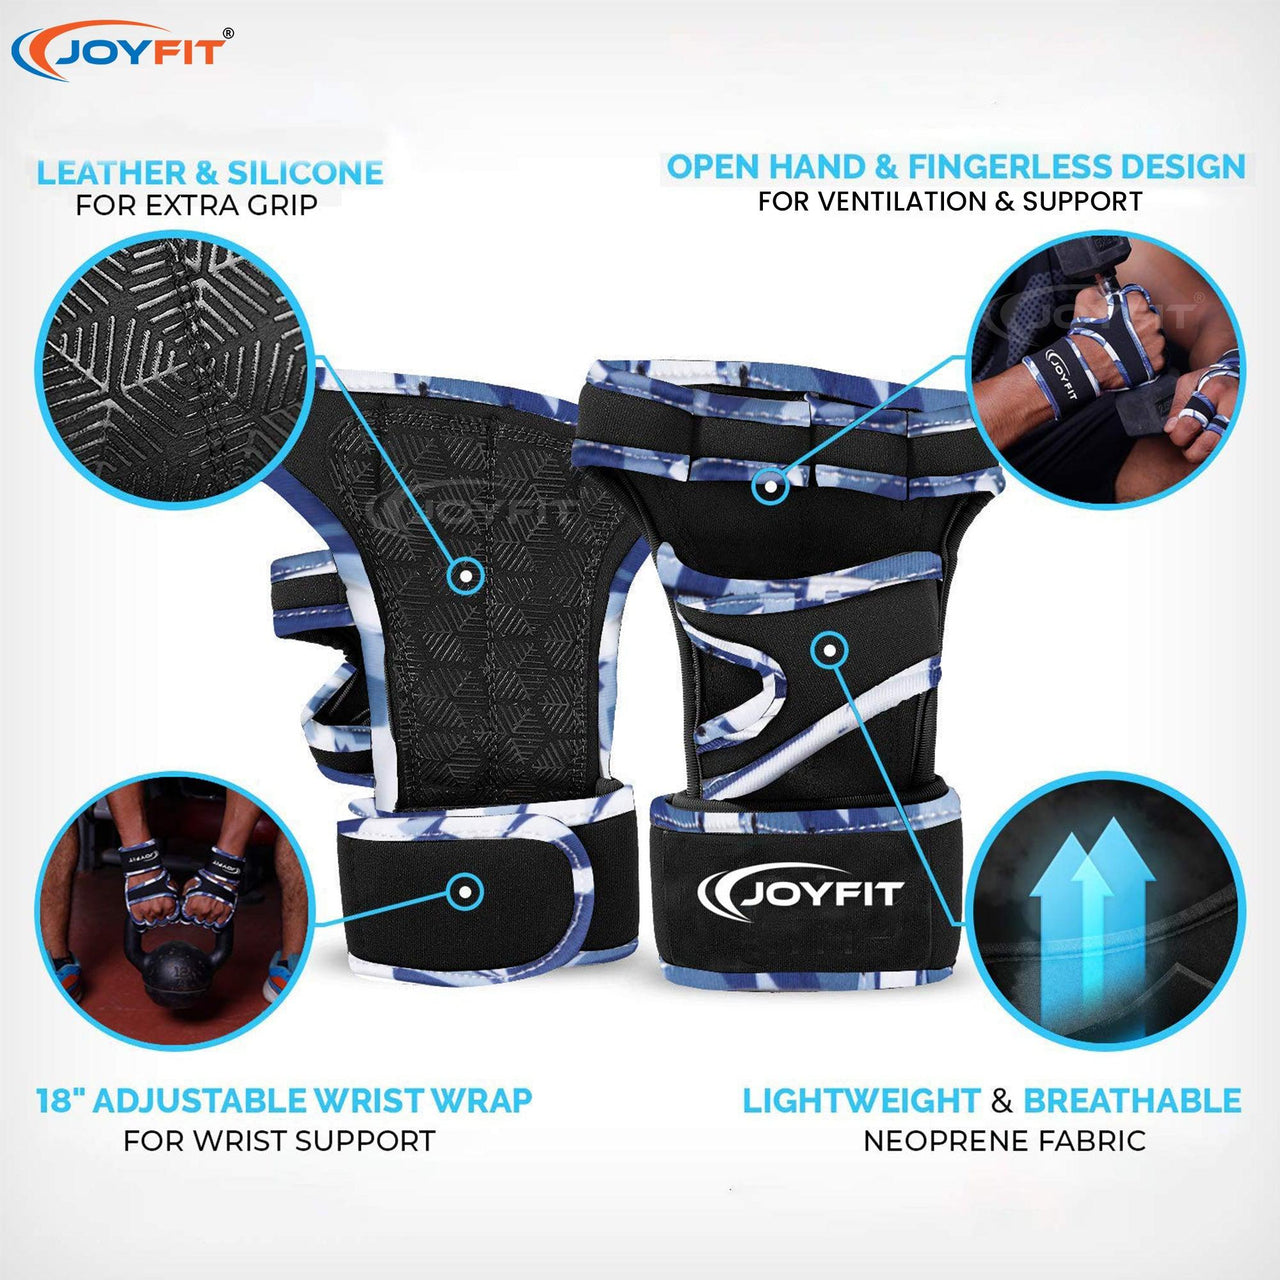 Weight Lifting Heavy Duty Gloves